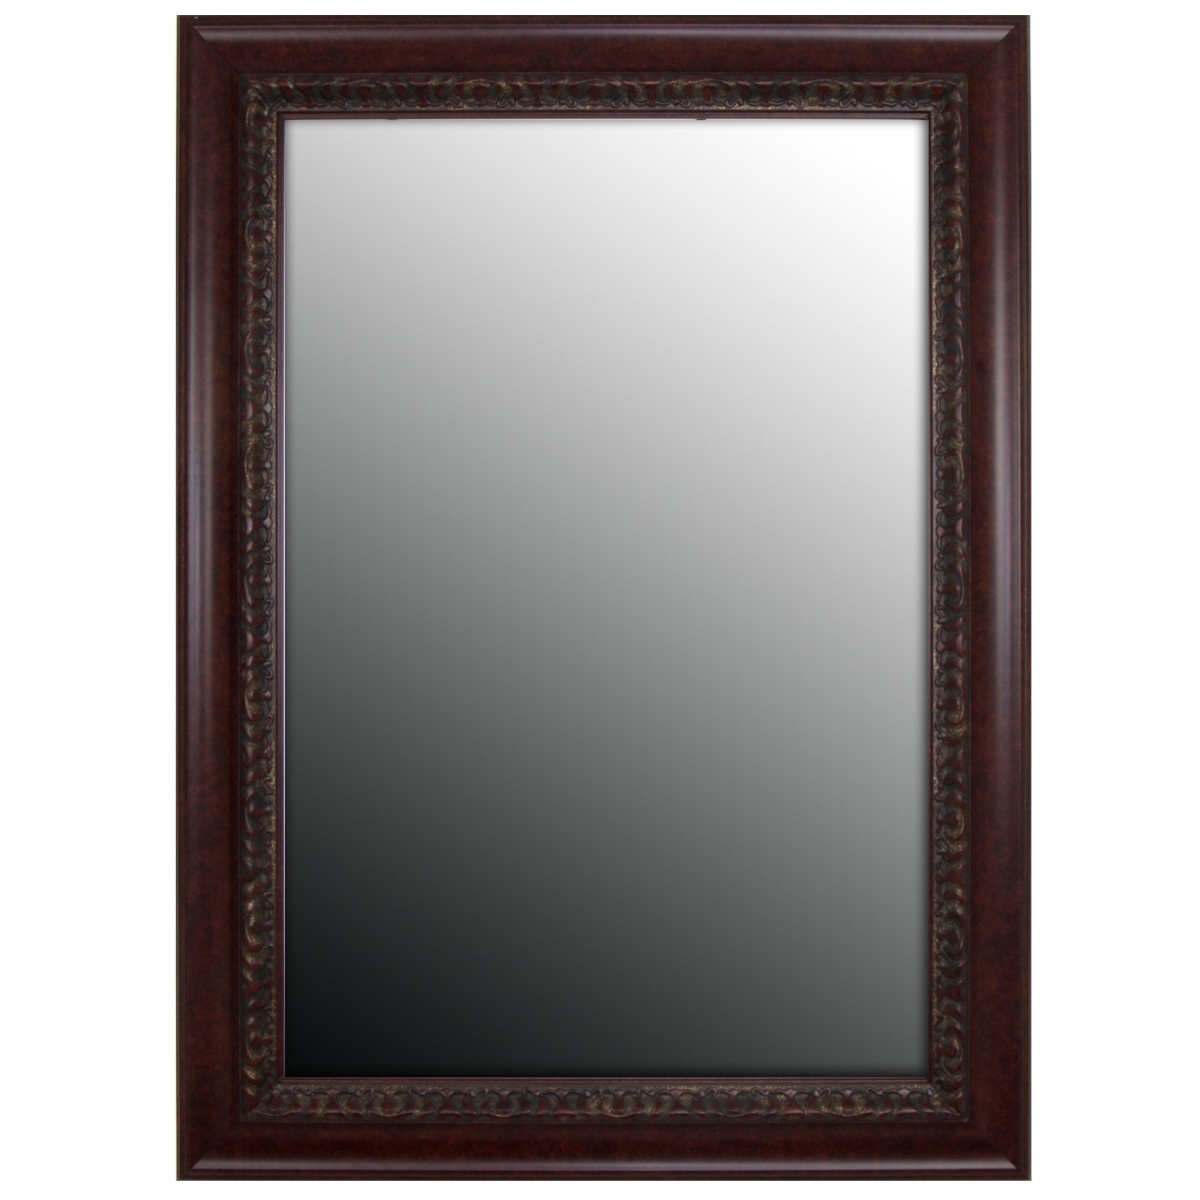 Hitchcock Butterfield 808402 Cherry Williamsburg Wall Mirror - 31 X 43 In.